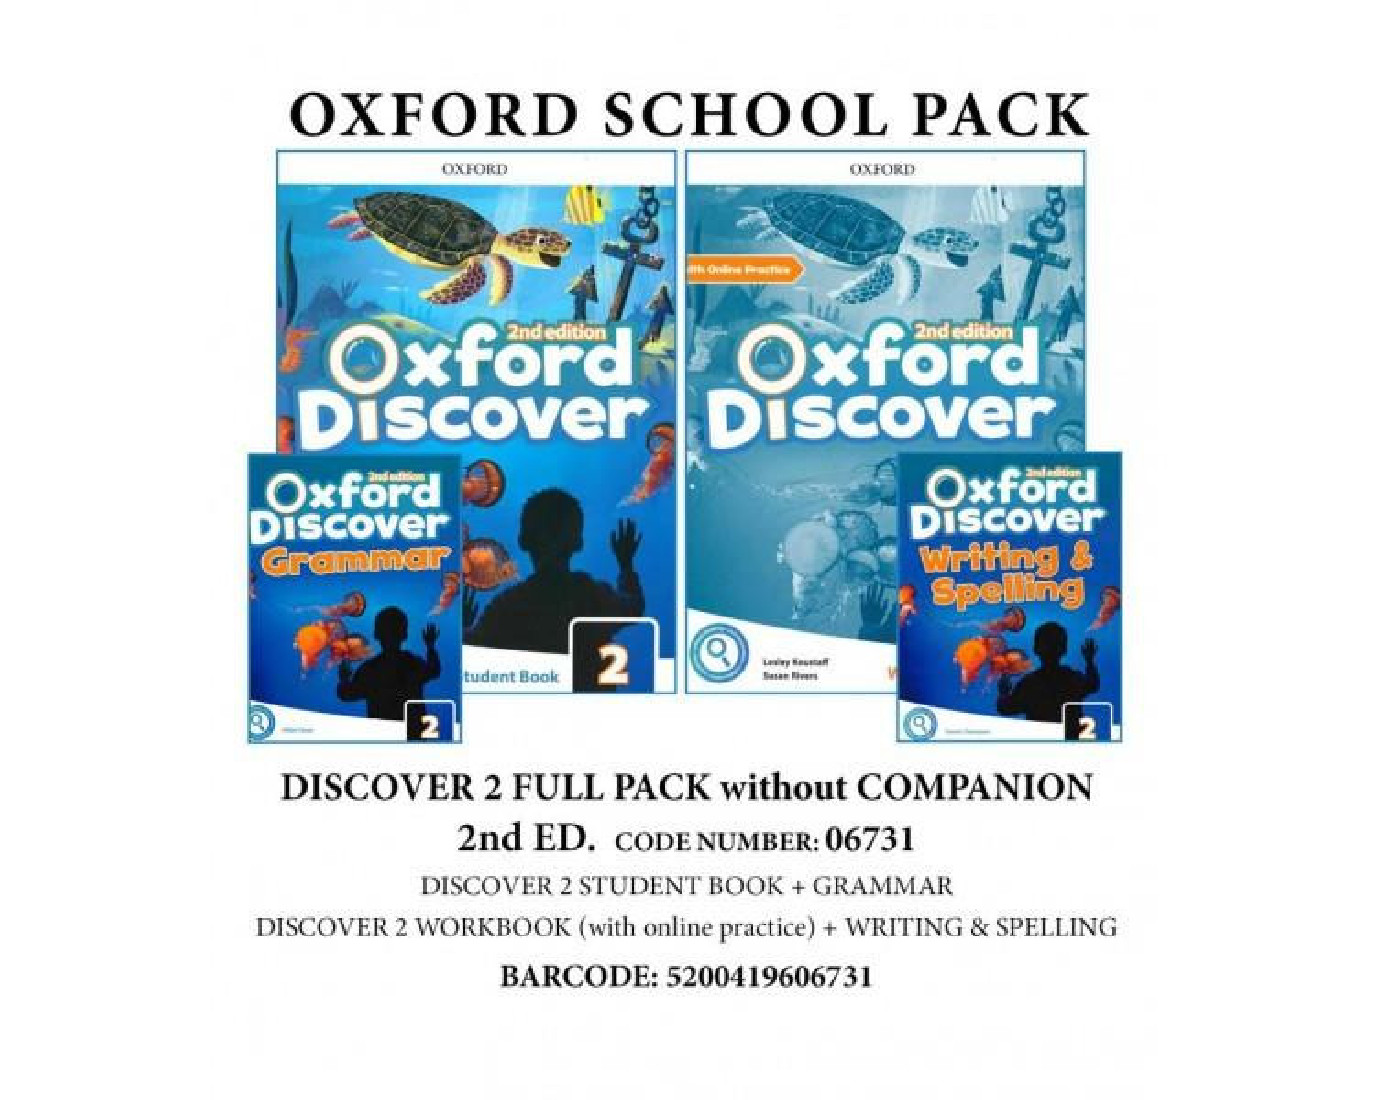 OXFORD DISCOVER 2 FULL PACK (without COMPANION) - 06731 2ND ED